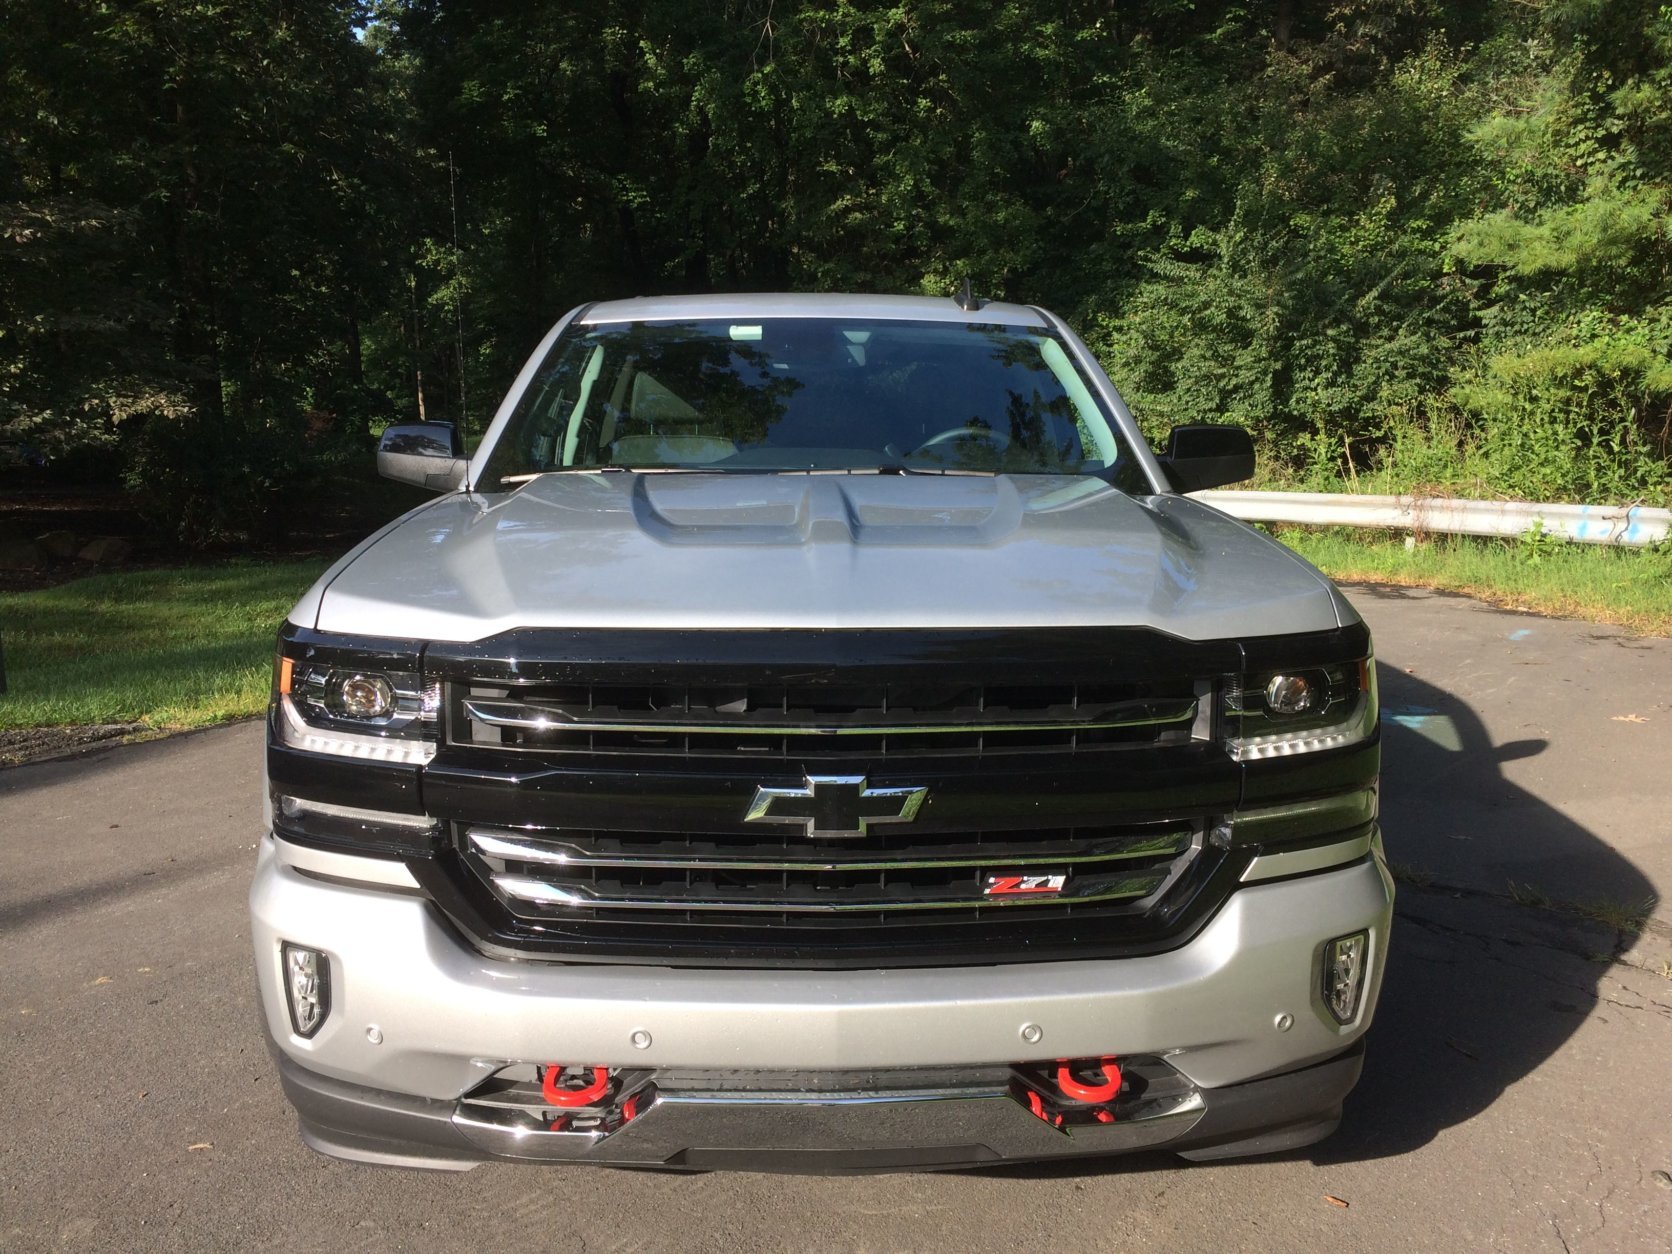 The Chevrolet Silverado 1500 is the second-best selling vehicle in the U.S. and with three different cabin sizes and bed lengths, and six trim levels there is a truck for most budgets. You may get more value for your buck right now before the 2019 model hits the dealer floors. (WTOP/Mike Parris)